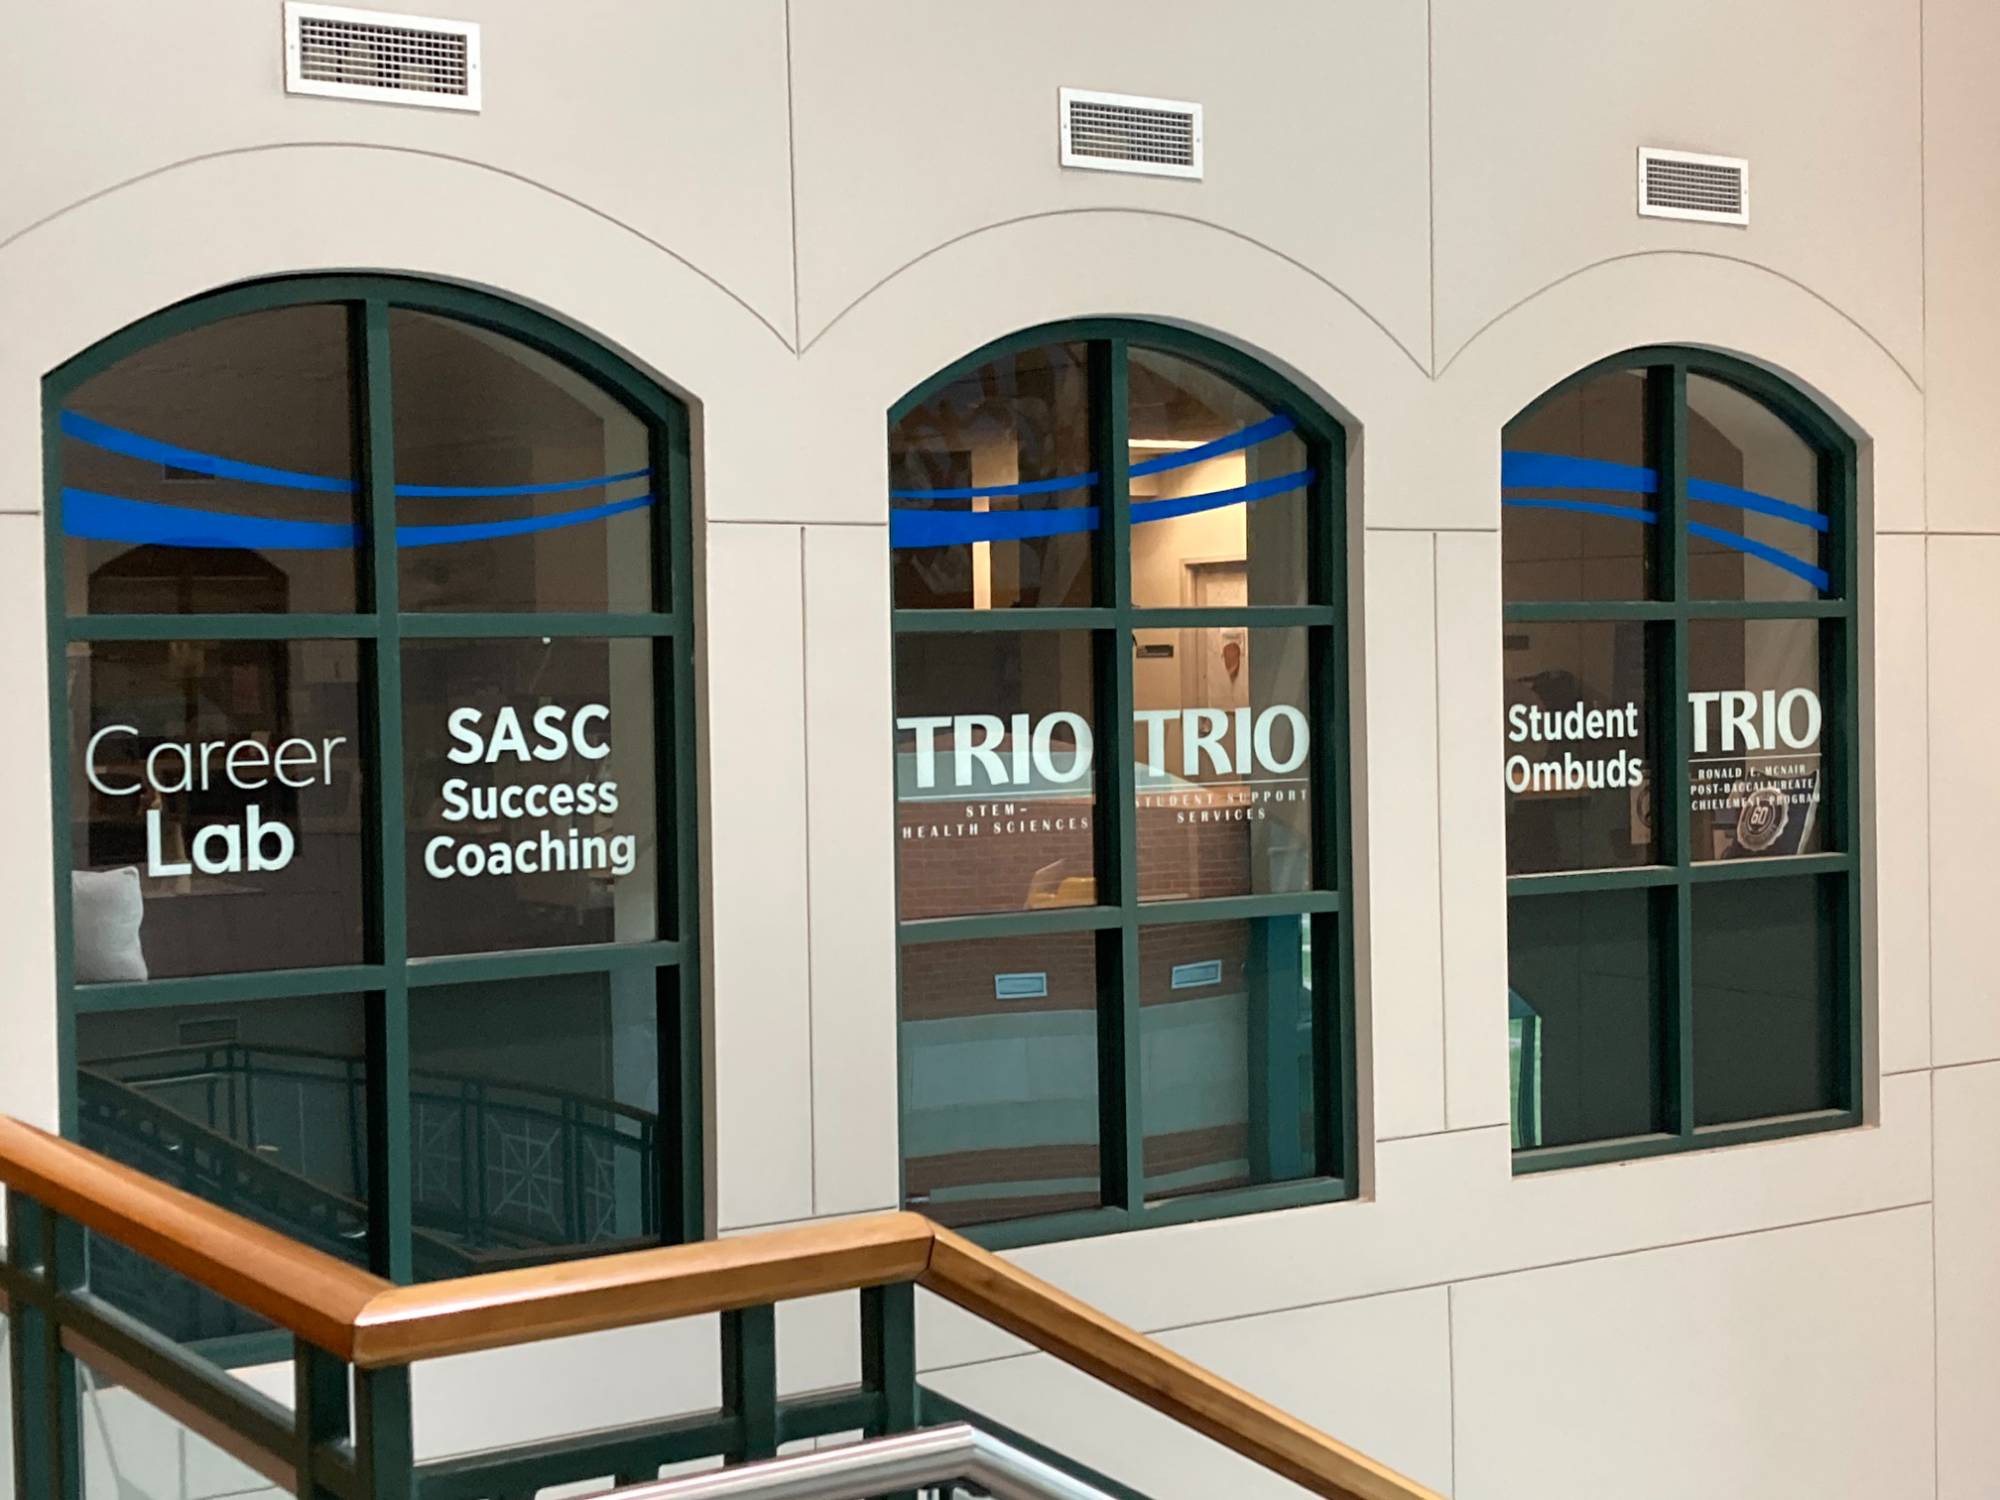 Stairs and window outside of the Student Academic Success Center Office Suite. Windows list Career Lab, SASC Success Coaching, TRIO and Student Ombuds